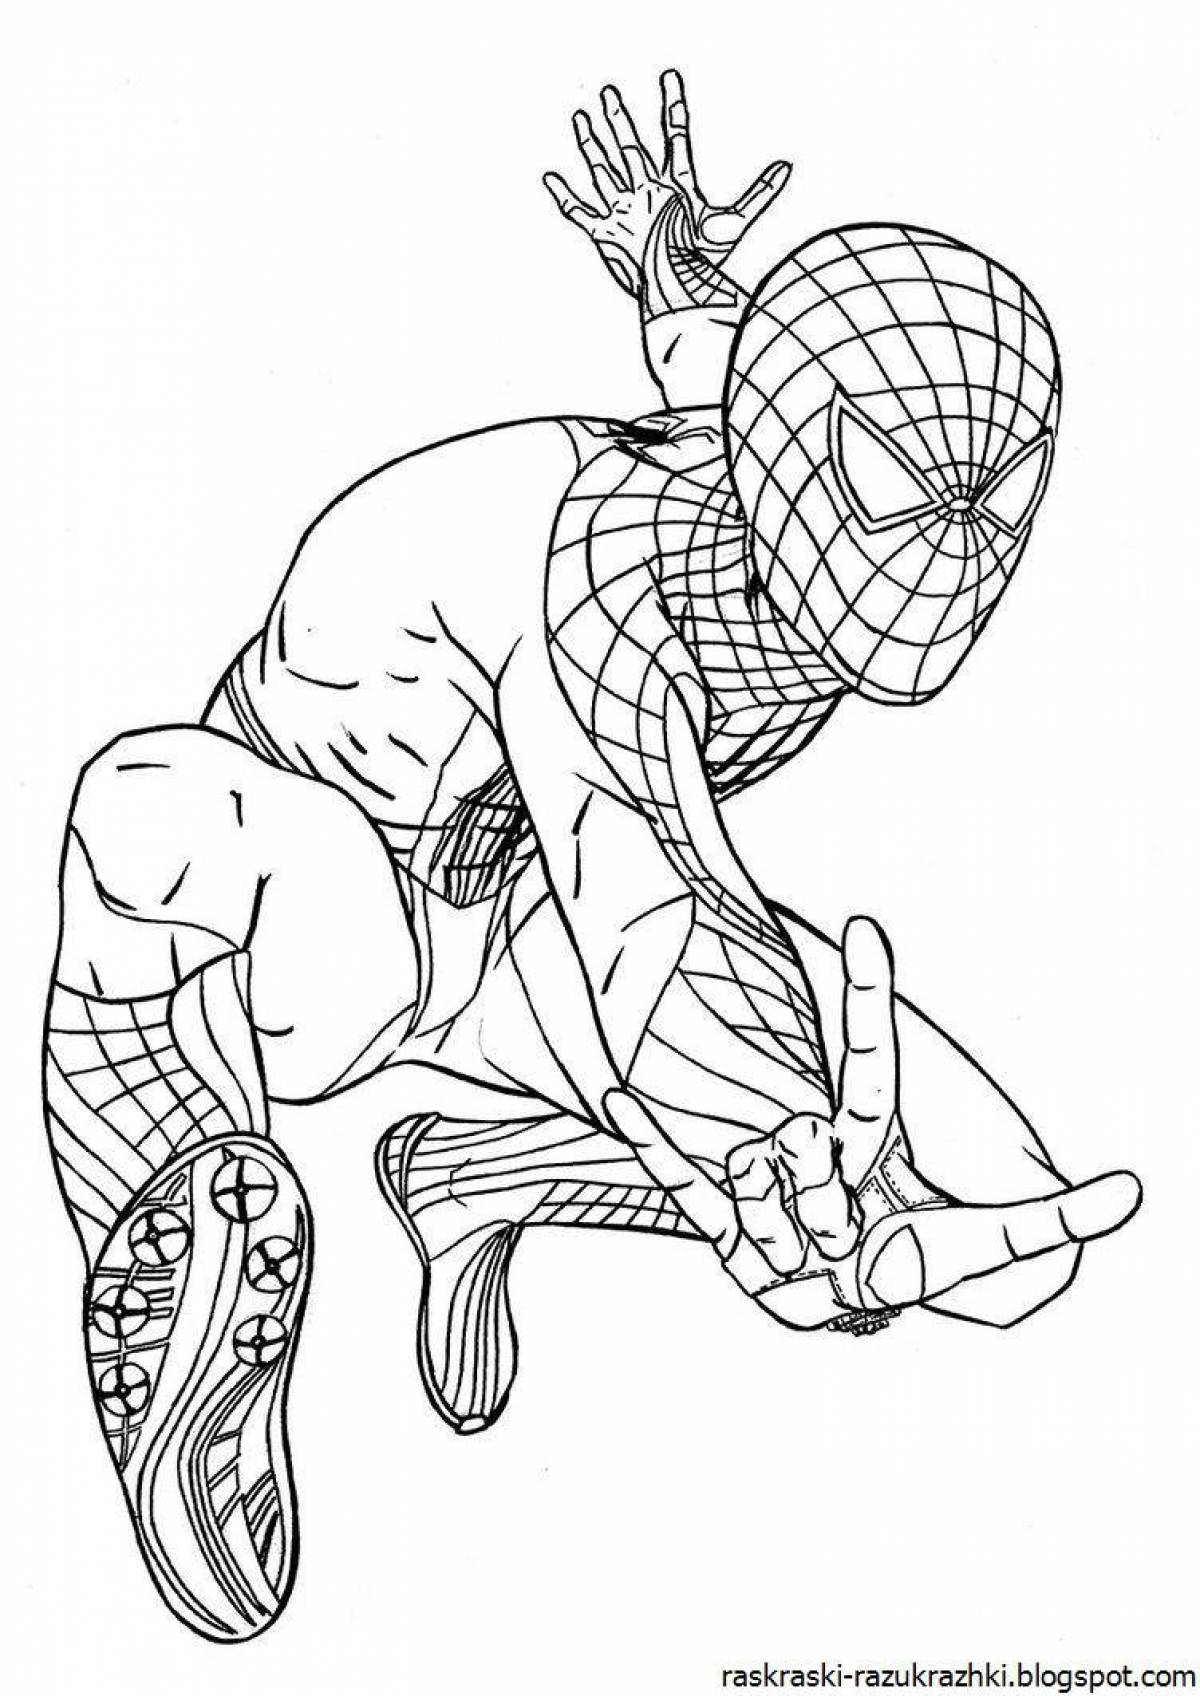 Attractive spiderman coloring pages for kids